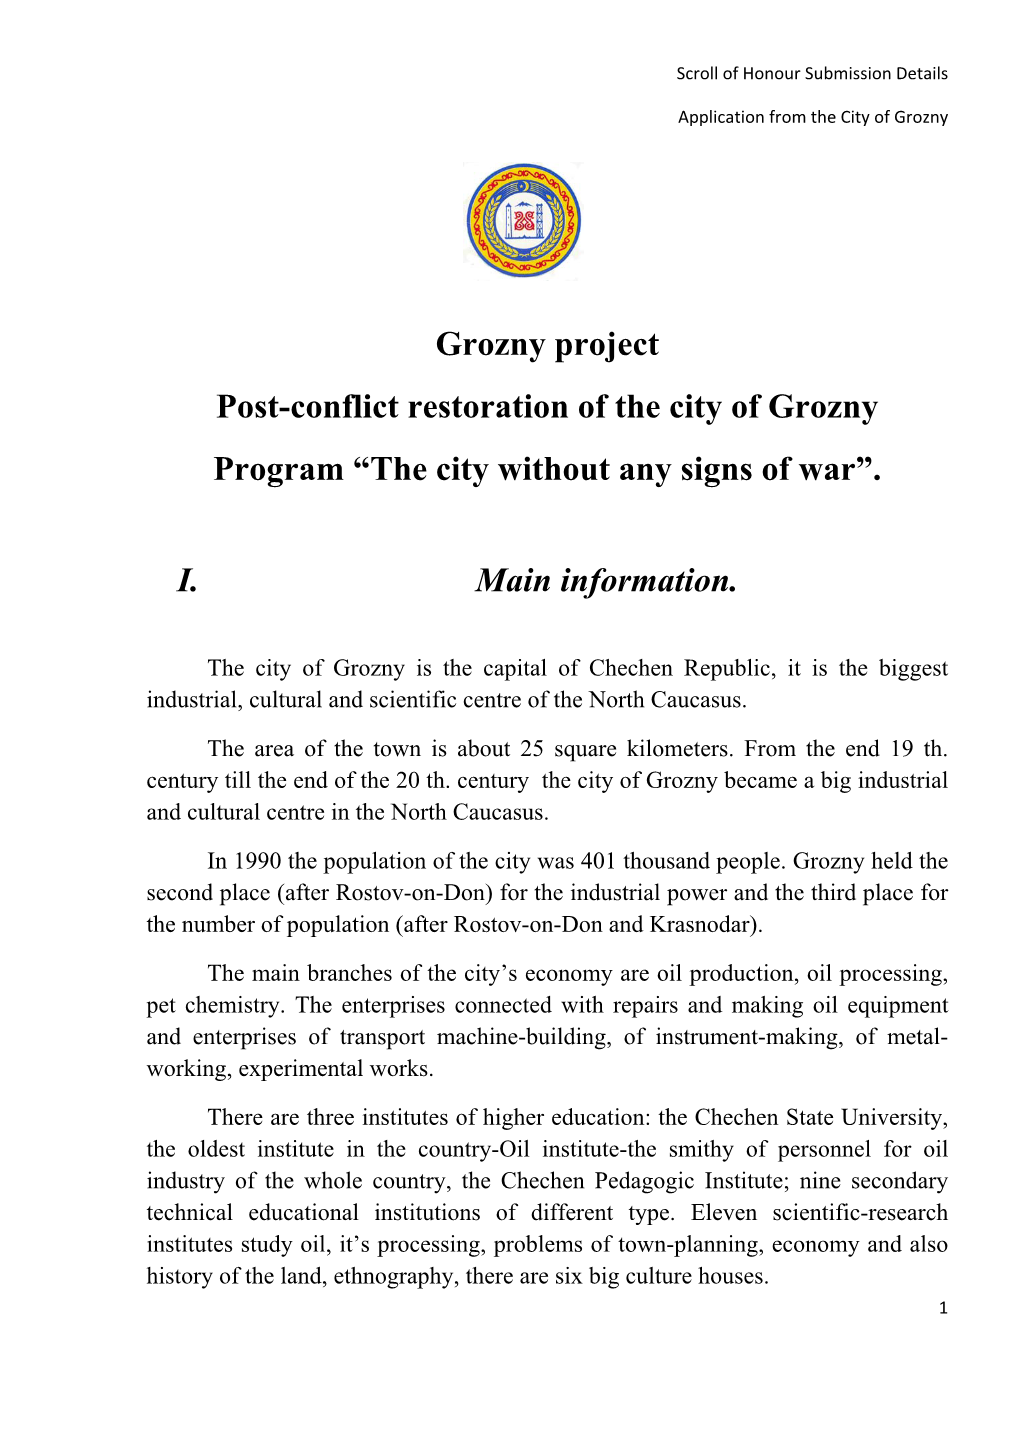 Grozny Project Post-Conflict Restoration of the City of Grozny Program “The City Without Any Signs of War”